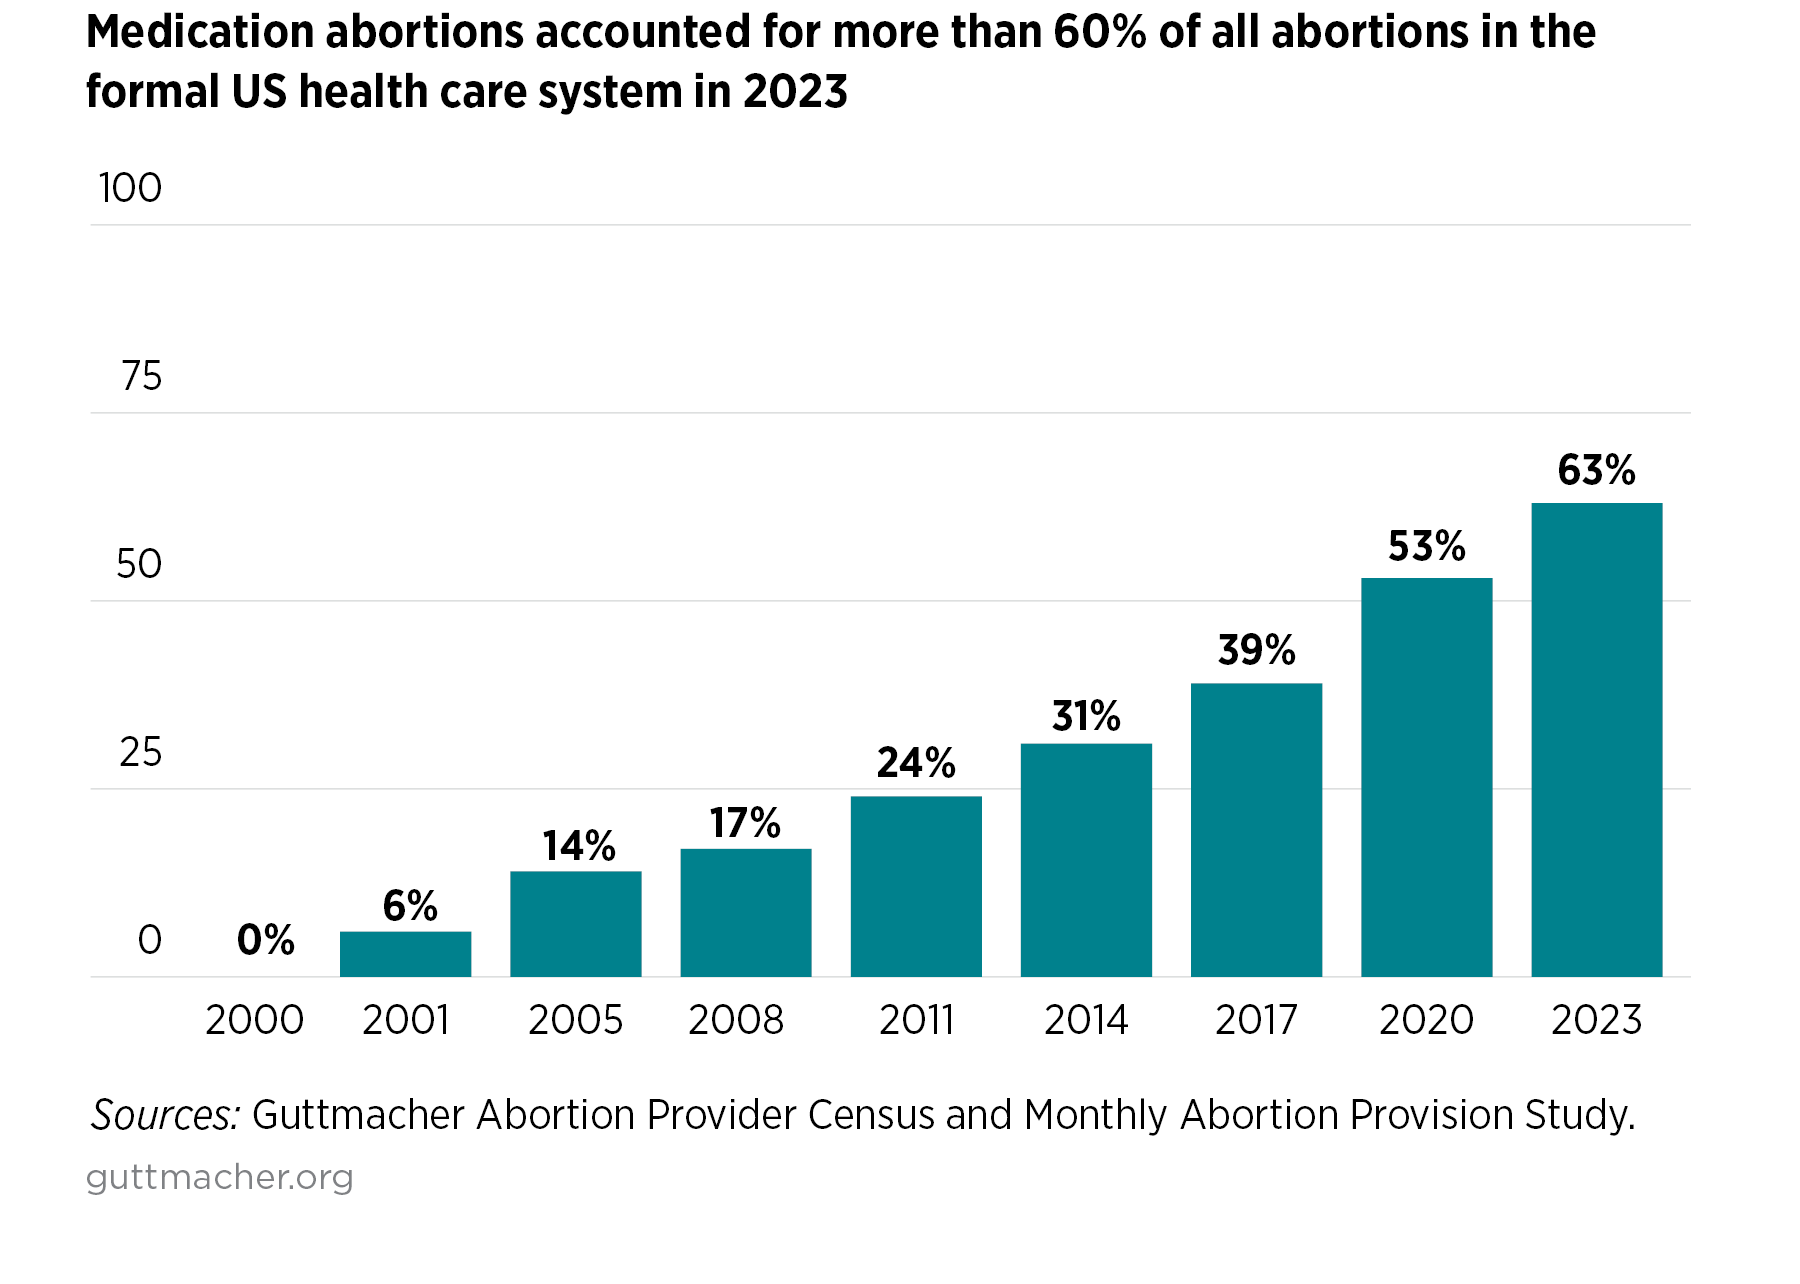 bar chart of the percentage of abortions that were done with medication from 2000 to 2023